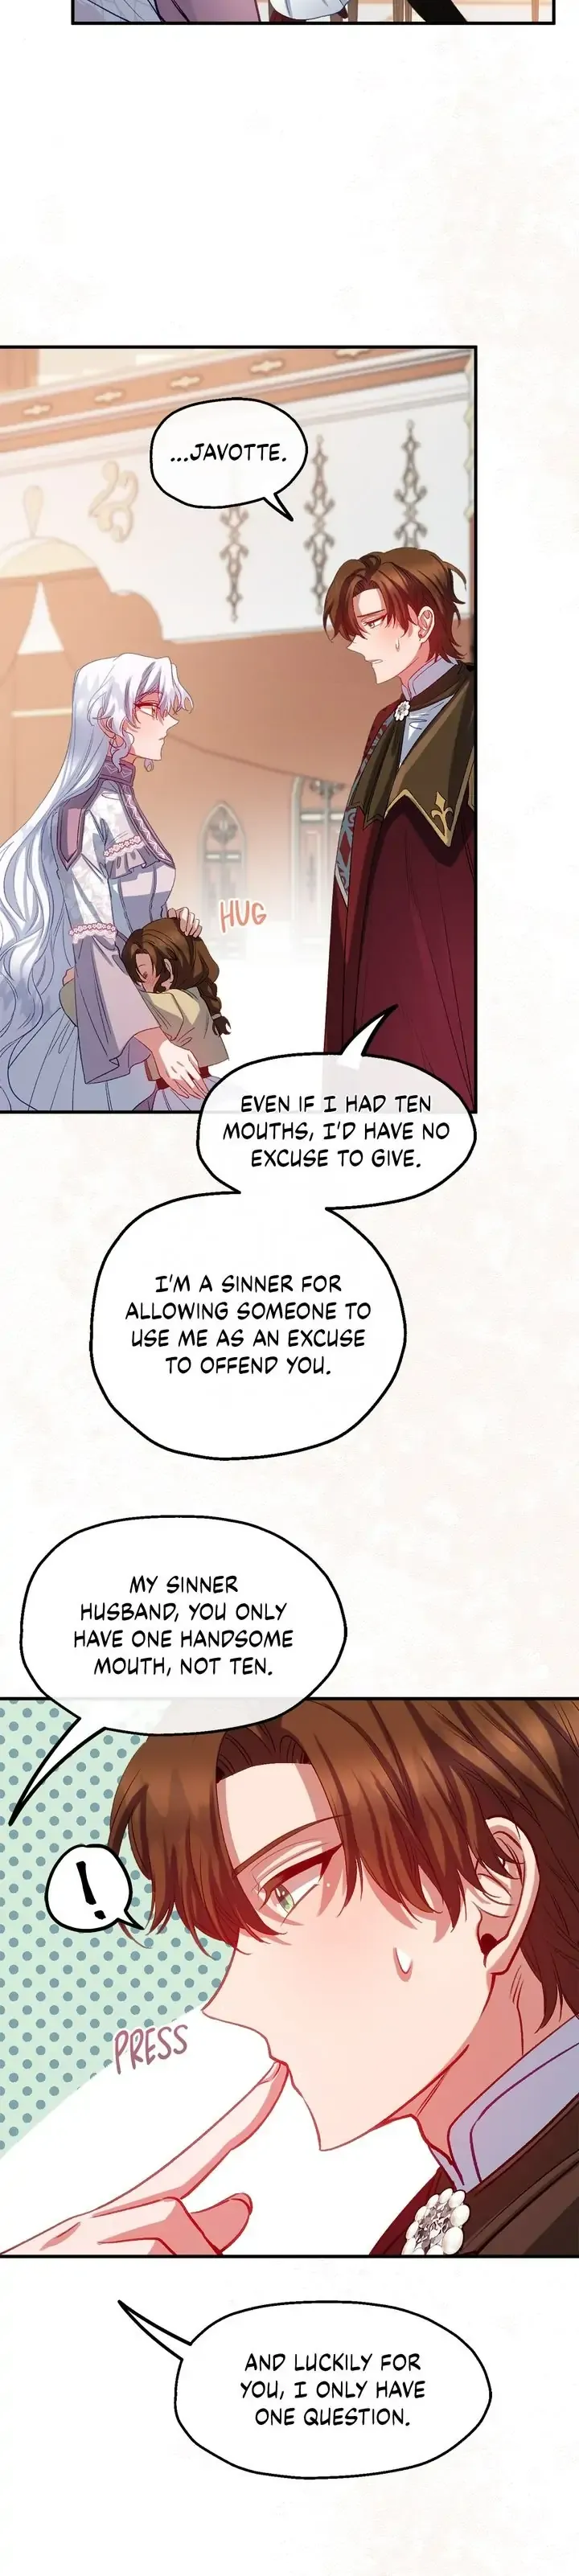 Don't Call Javotte an Evil Stepsister Chapter 52 page 22